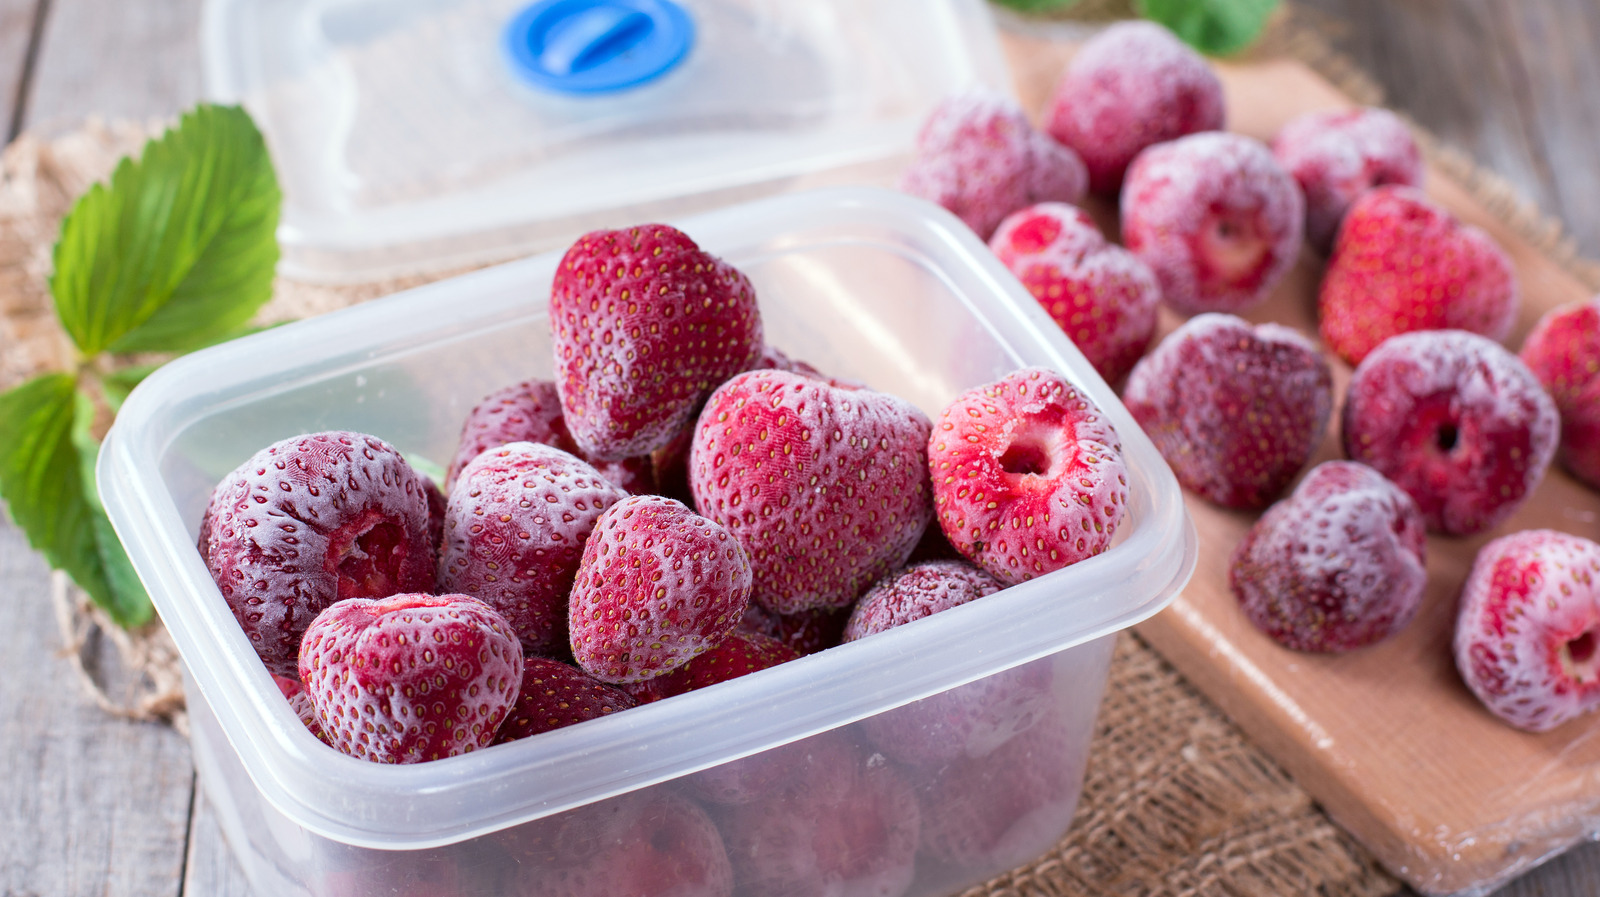 Costco's Frozen Strawberry Recall The Hepatitis Risks You Need To Know